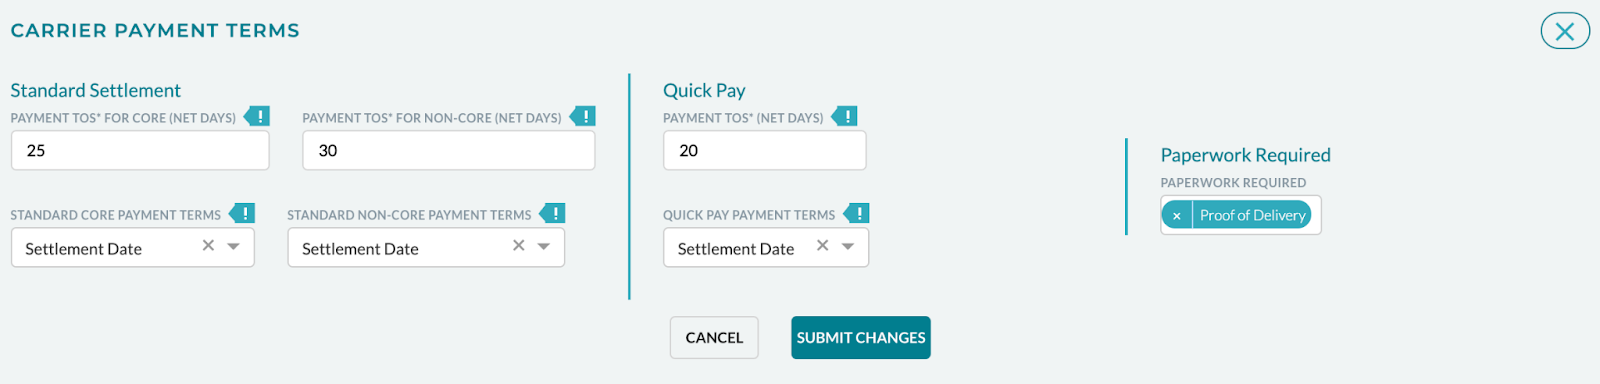 carrier payment terms 2.png